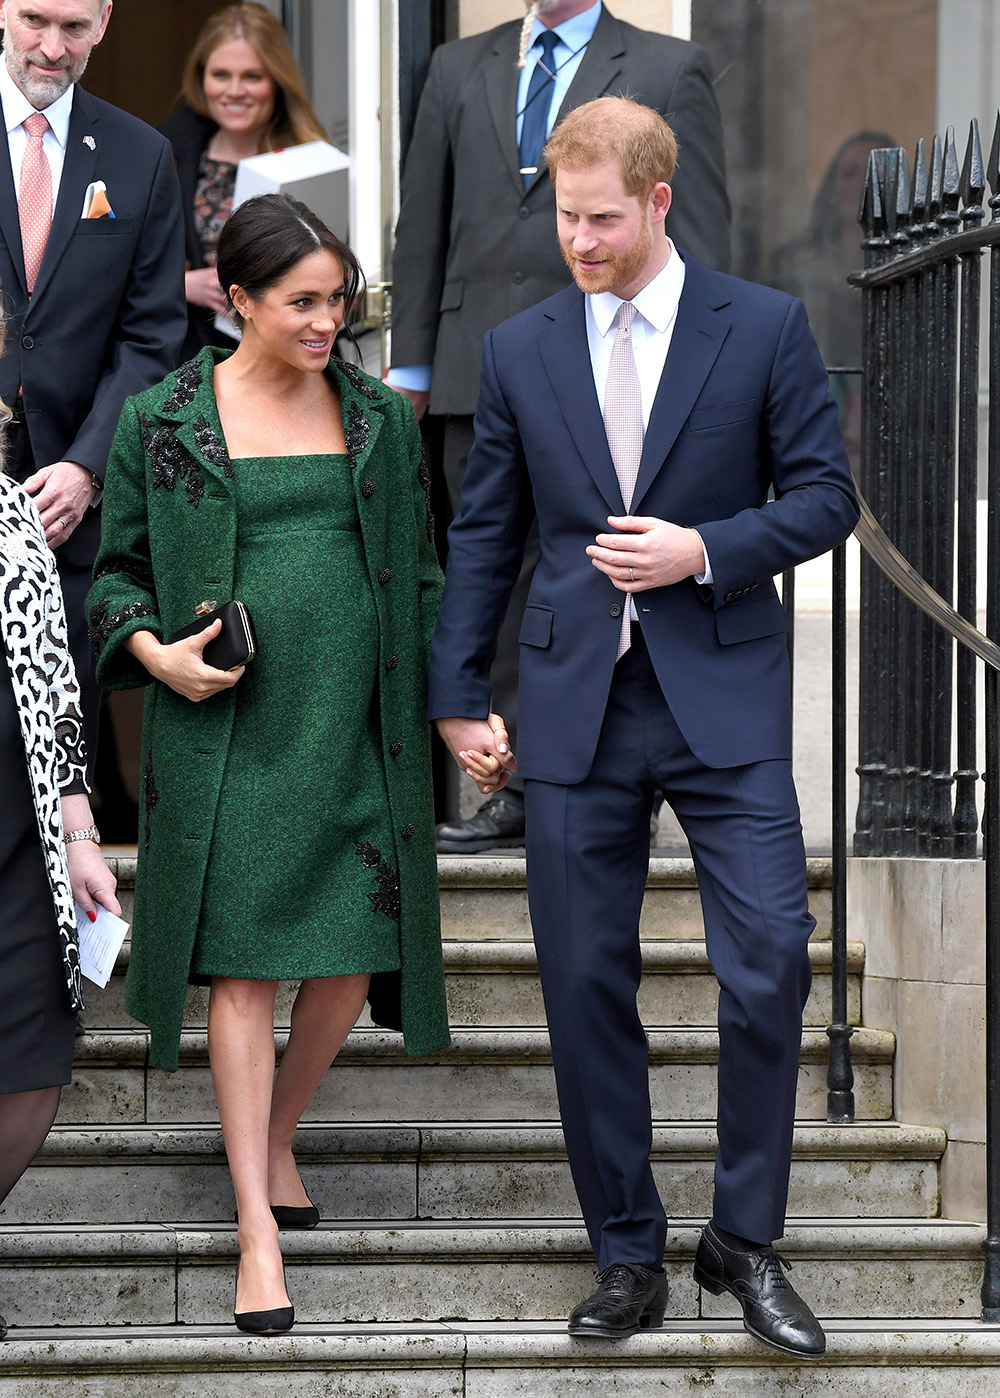 LONDON, ENGLAND - MARCH 11: Prince Harry, Duke of Sussex and Meghan, Duchess Of Sussex attend a Commonwealth Day Youth Event at Canada House on March 11, 2019 in London, England. The event will showcase and celebrate the diverse community of young Canadians living in London and around the UK. (Photo by Karwai Tang/WireImage)